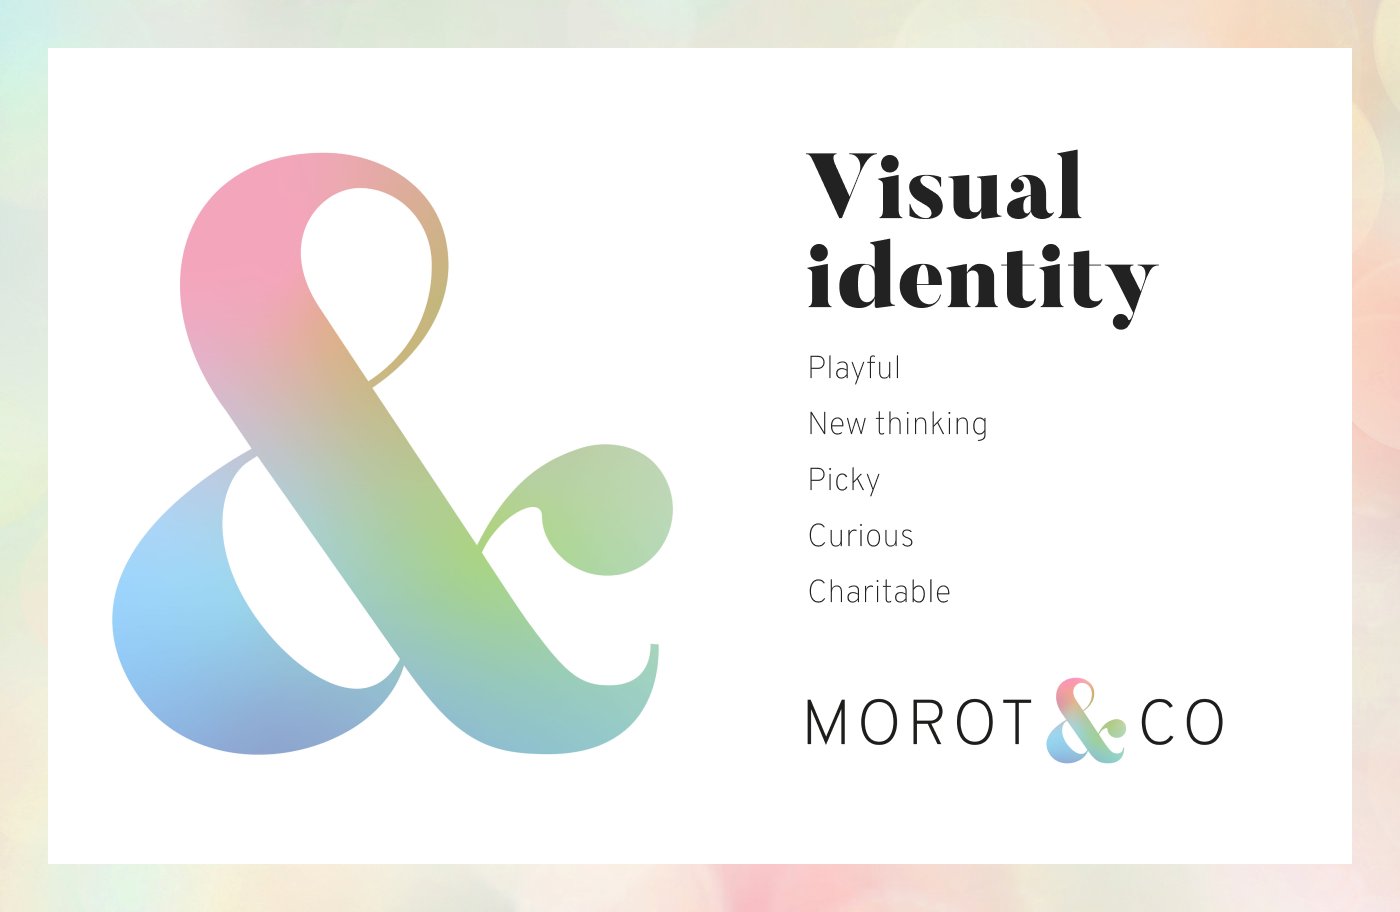 Morot & Co visual identity - Overview